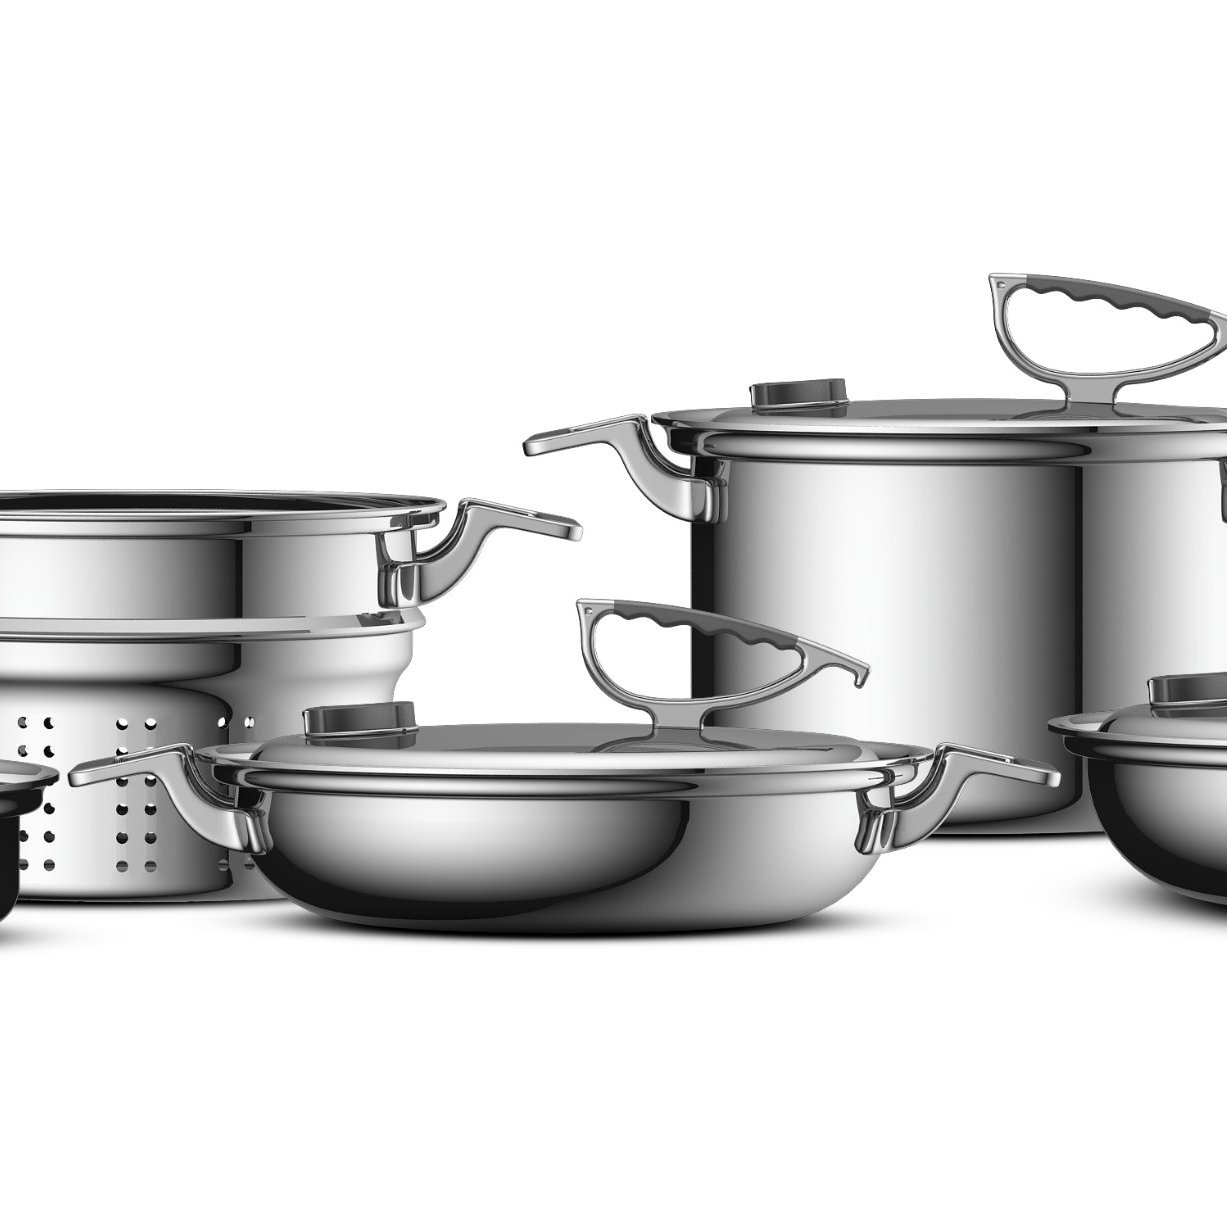 Cook Craft began as a way of introducing extremely high quality cookware for your every day home chef!